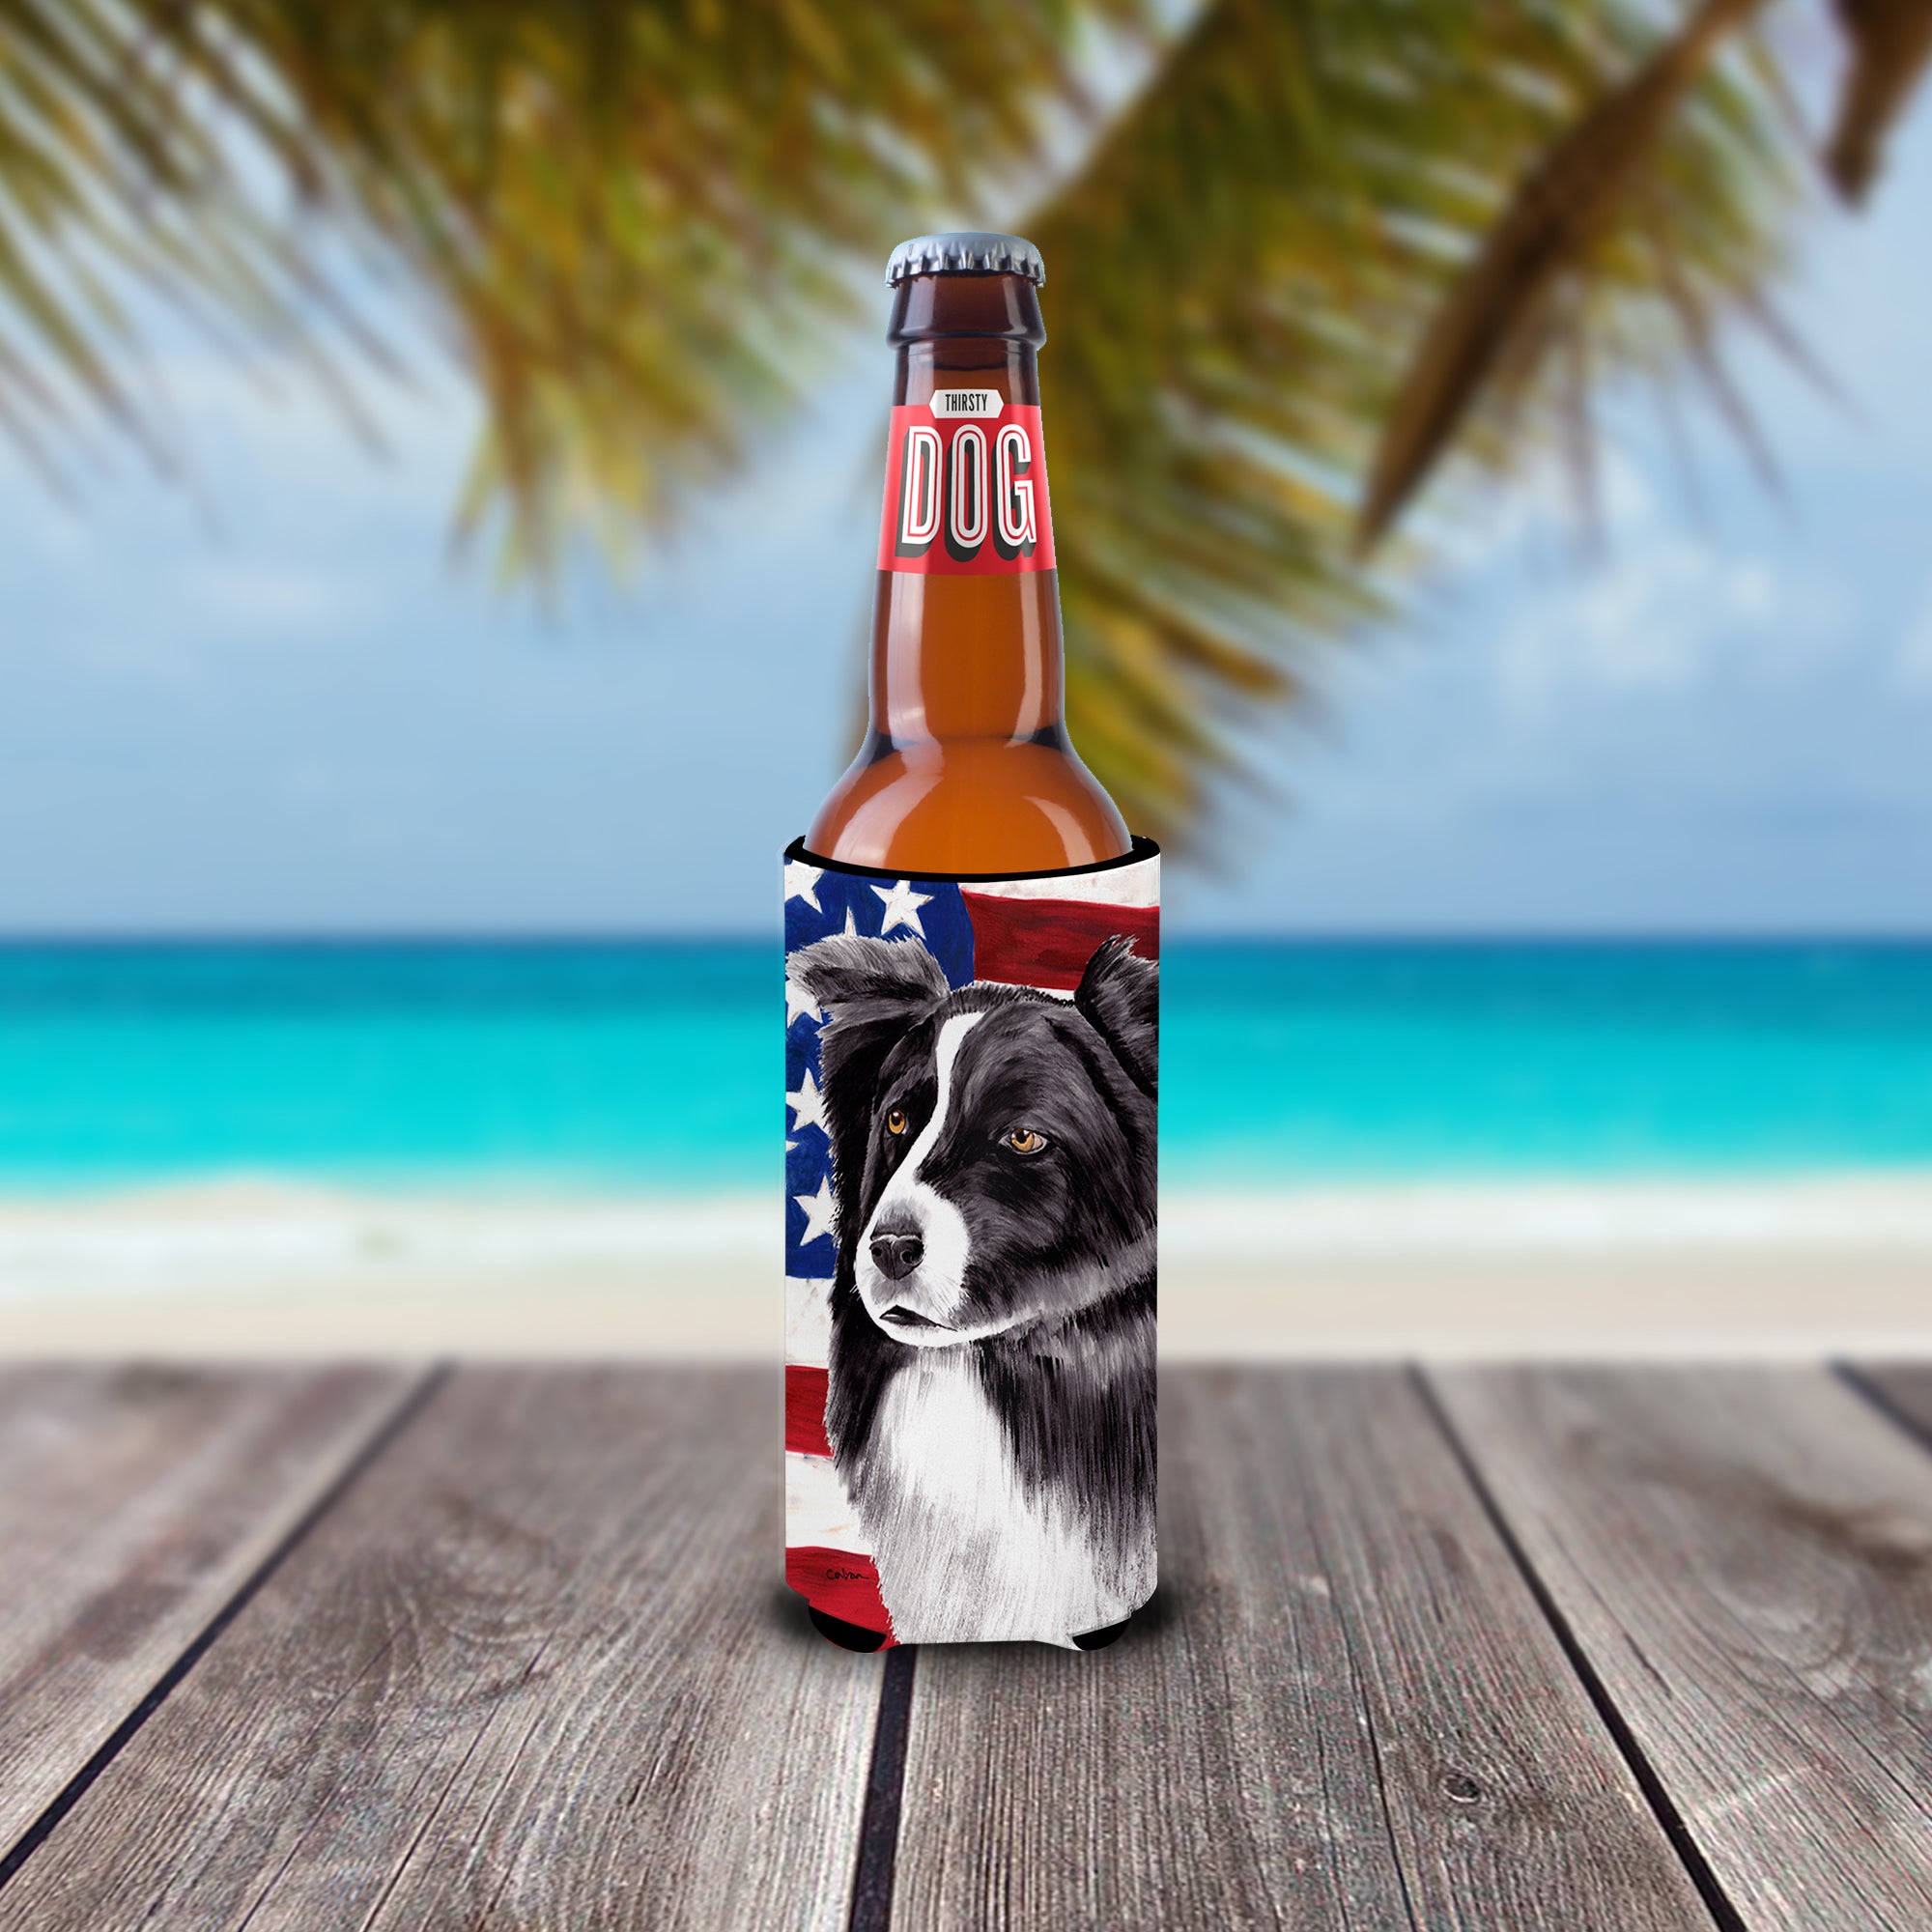 USA American Flag with Border Collie Ultra Beverage Insulators for slim cans SC9009MUK